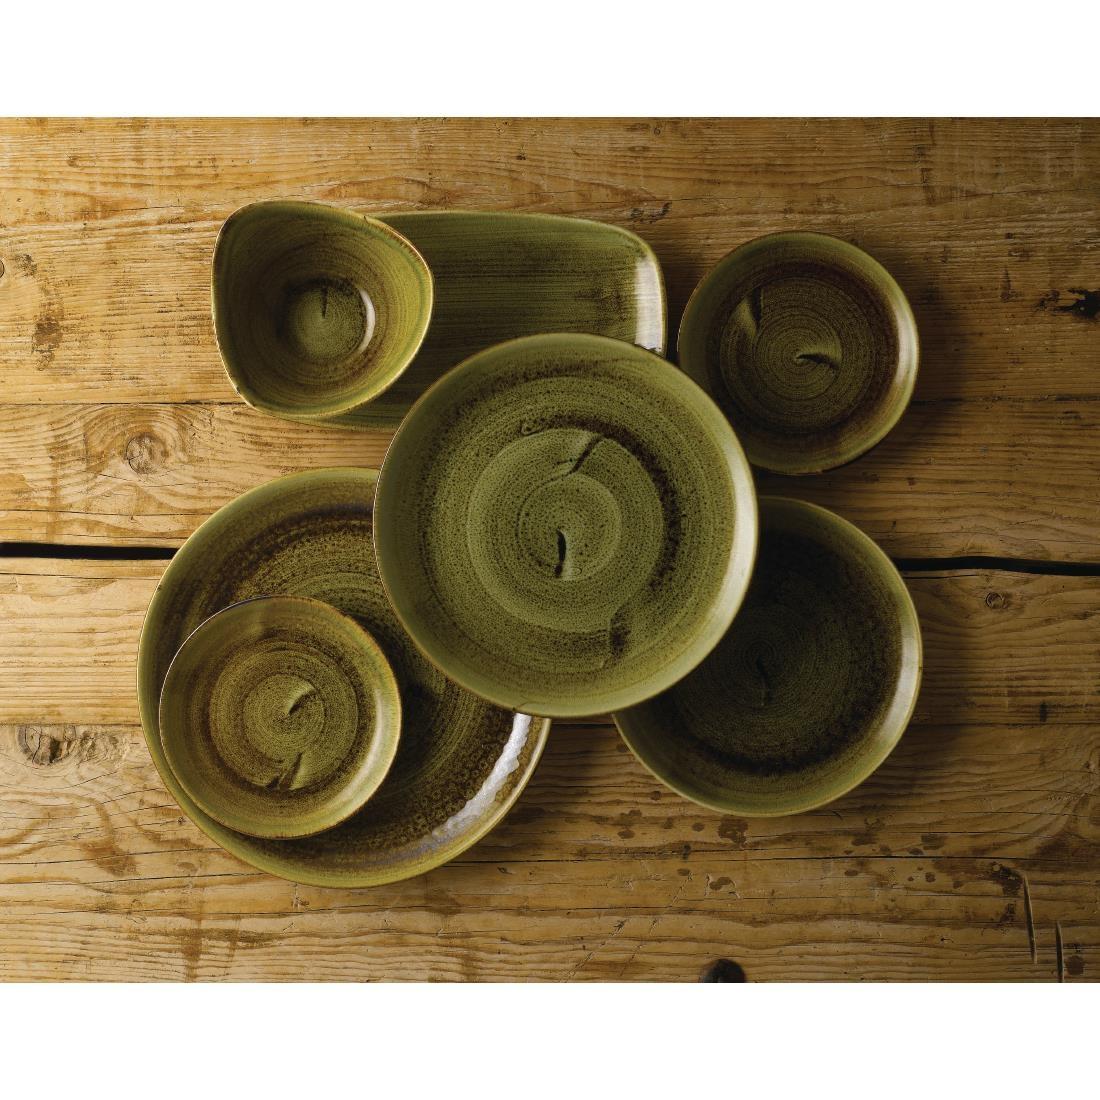 Stonecast Plume Olive Chefs' Oblong Plate No. 3 11 3/4 x 6 " (Pack of 12) - FJ936  - 2